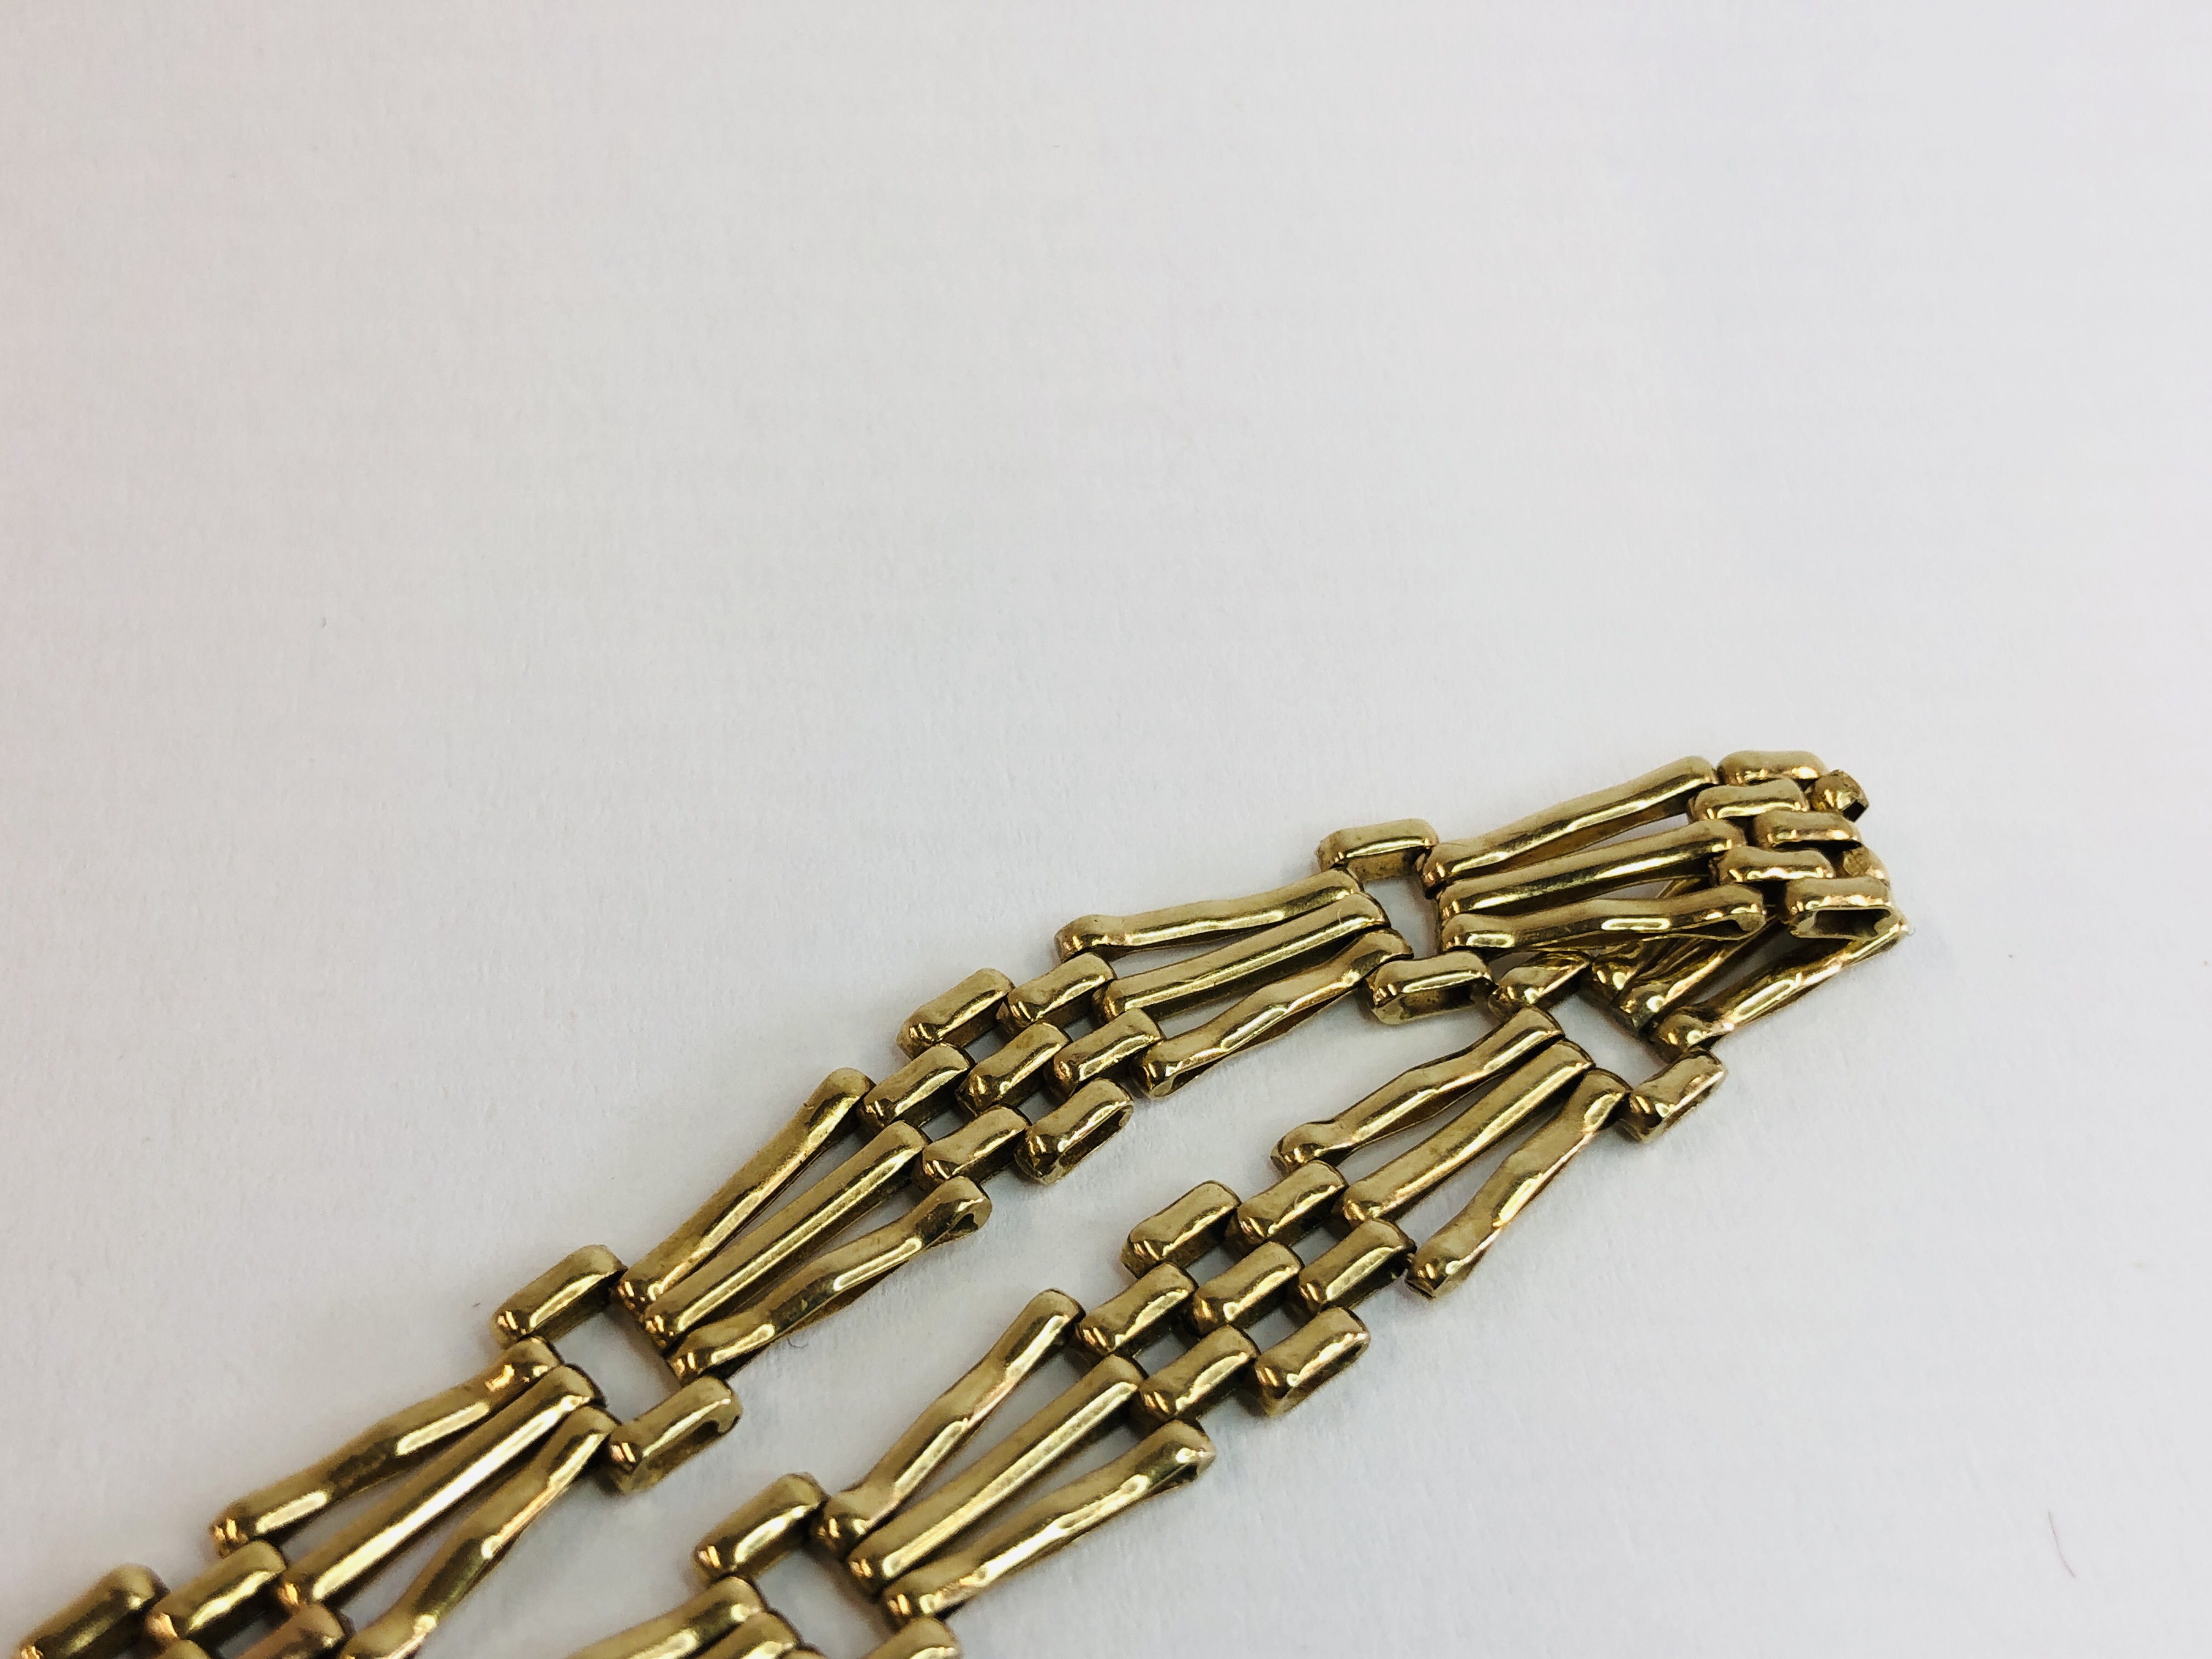 A 9CT GOLD 3 BAR GATE BRACELET AND PADLOCK CLASP - Image 4 of 8